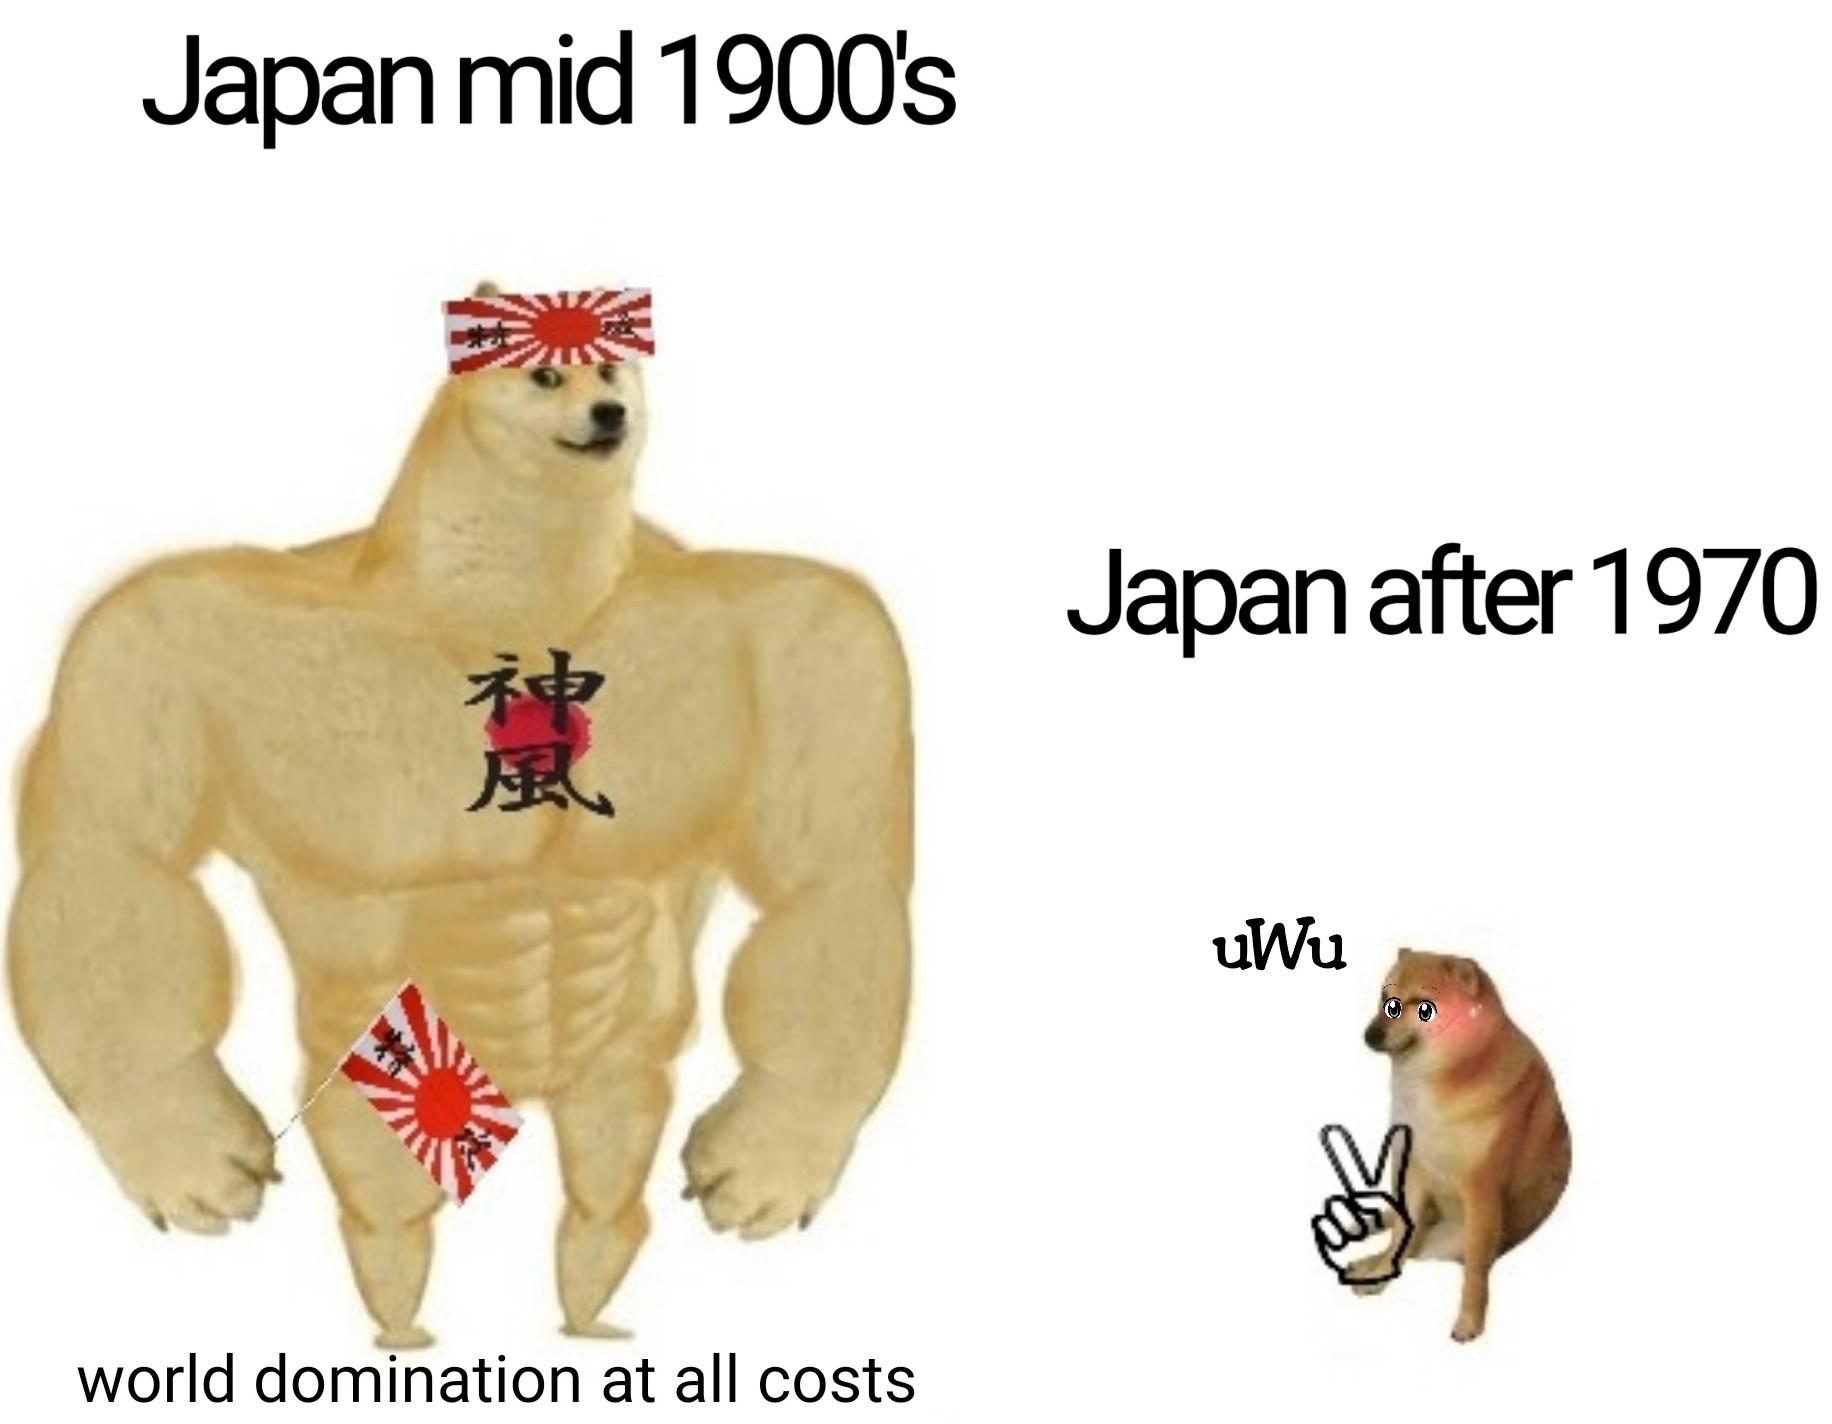 Dank, Japan, Zoomers, Japanese, America, World War Dank Memes Dank, Japan, Zoomers, Japanese, America, World War text: Japan mid 19001s Japan after 1970 uwu world domination at all costs 